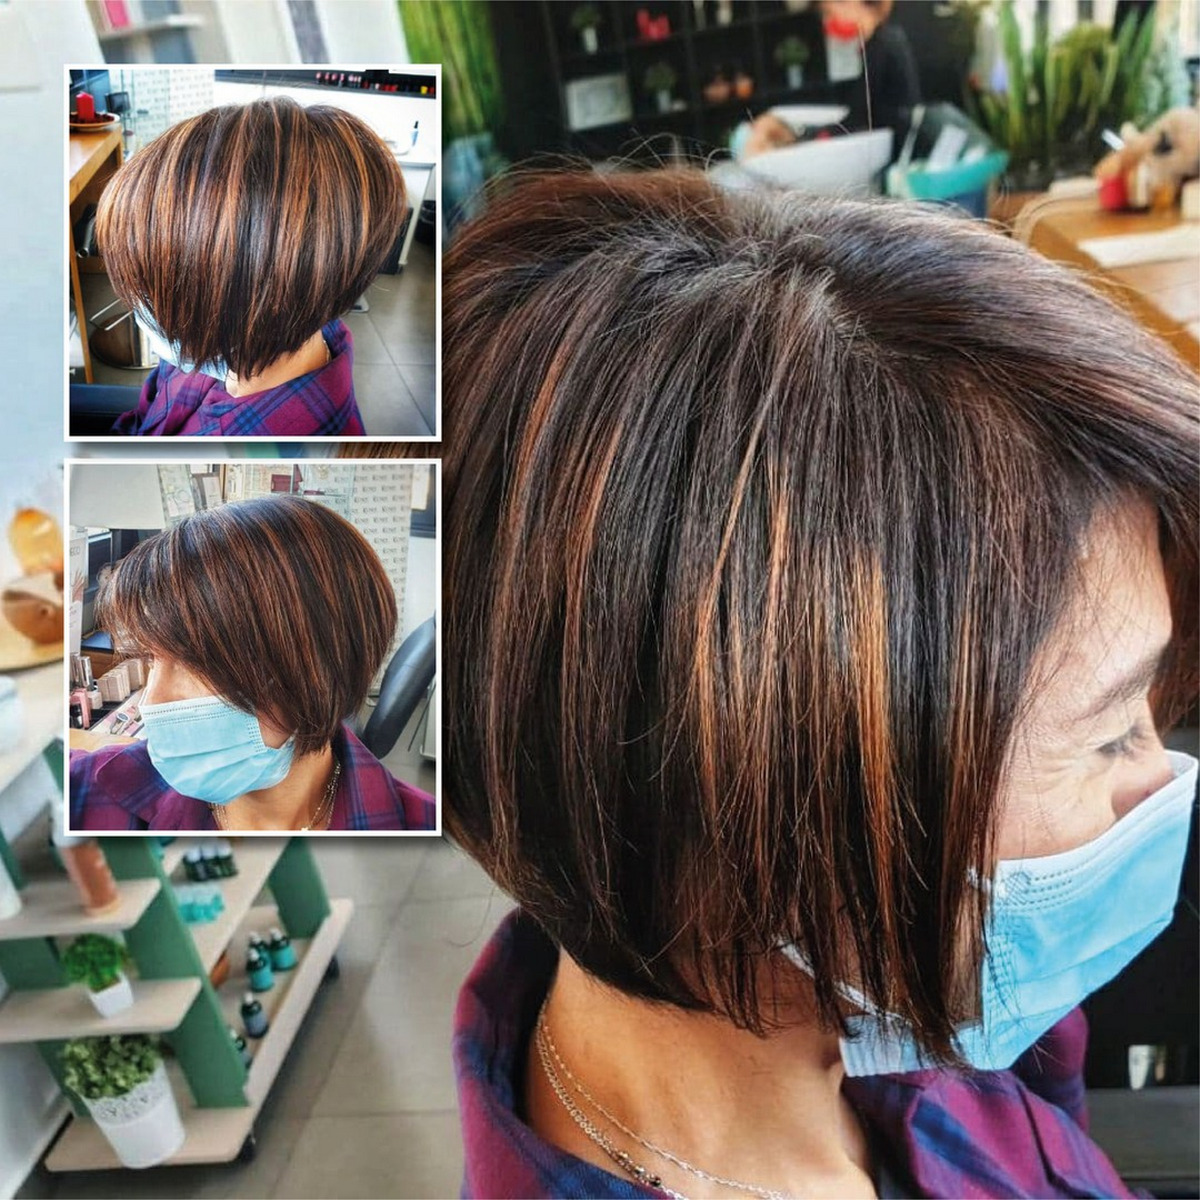 The Difference Between an A-Line, Graduated Bob & Other Types of Bobs